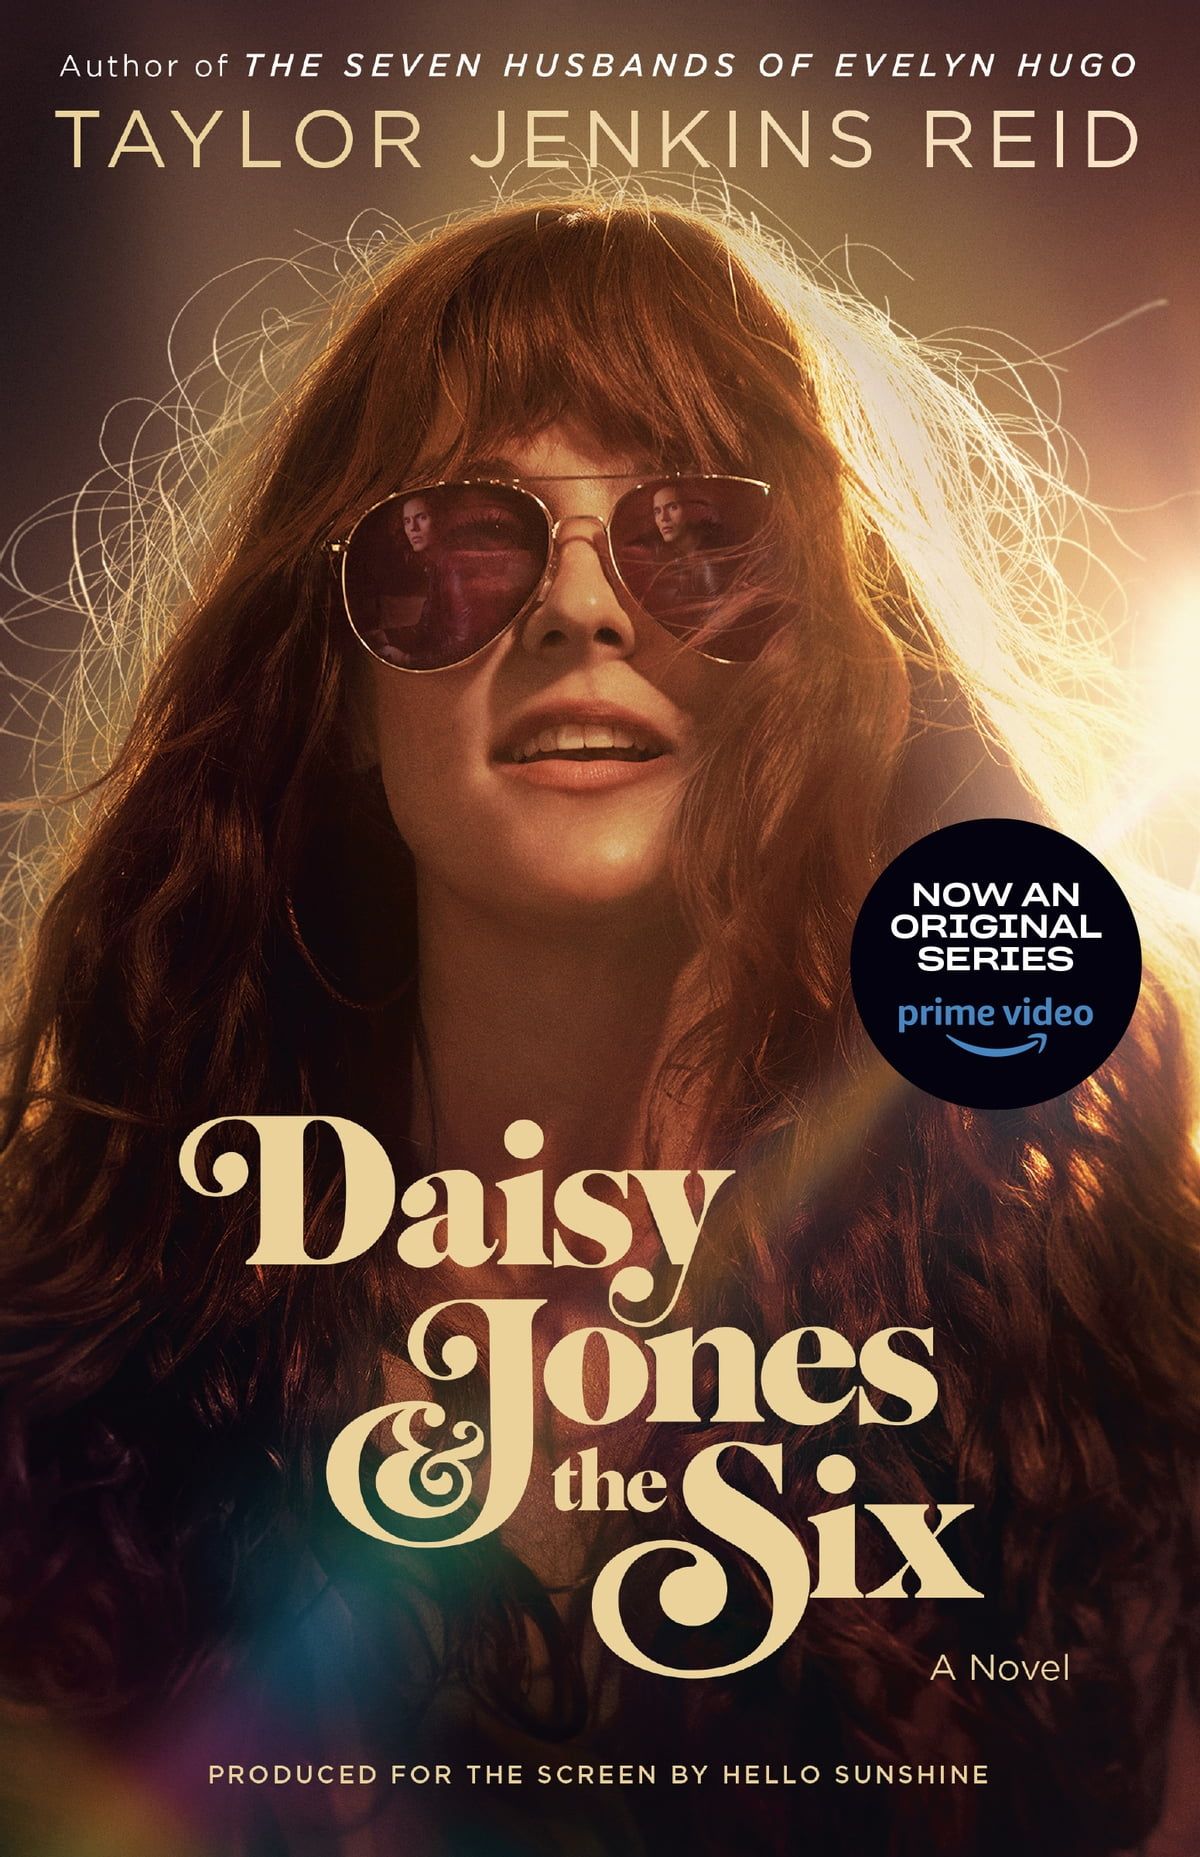 Daisy Jones and the Six book cover with image from Amazon Prime series on cover